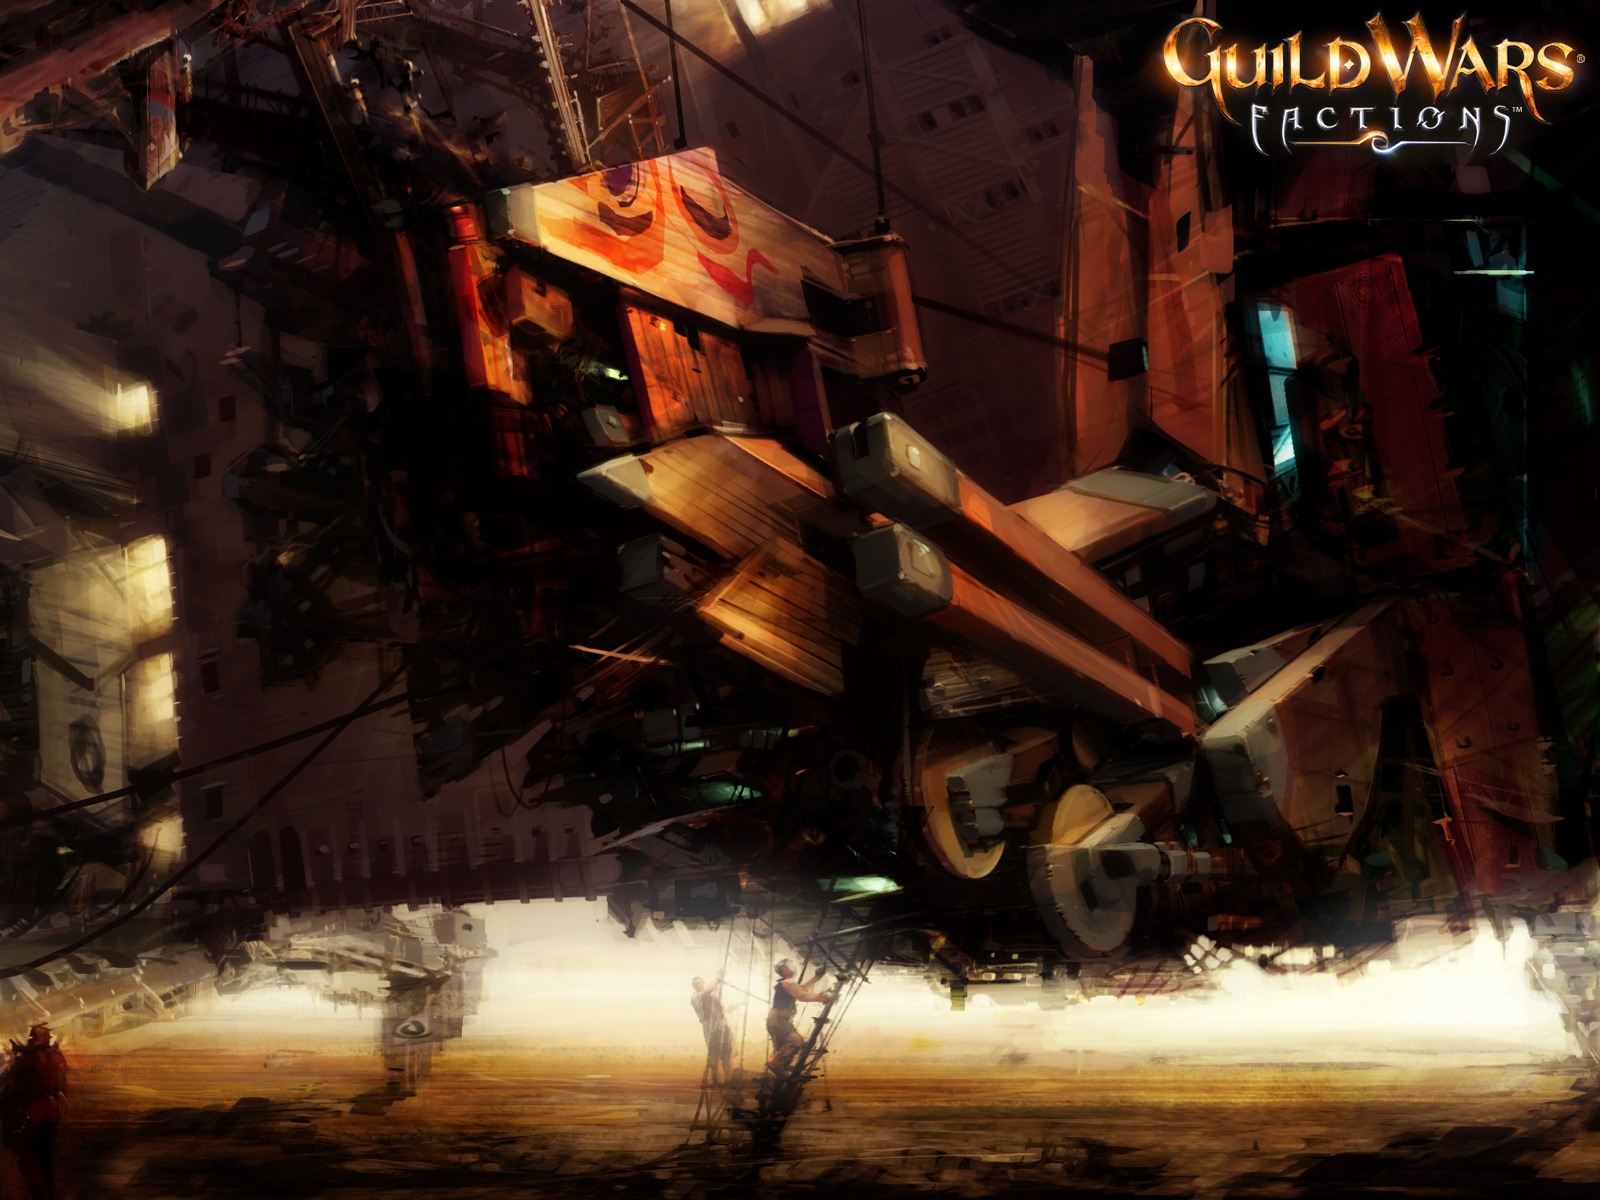 Guildwars tapety (1) #6 - 1600x1200